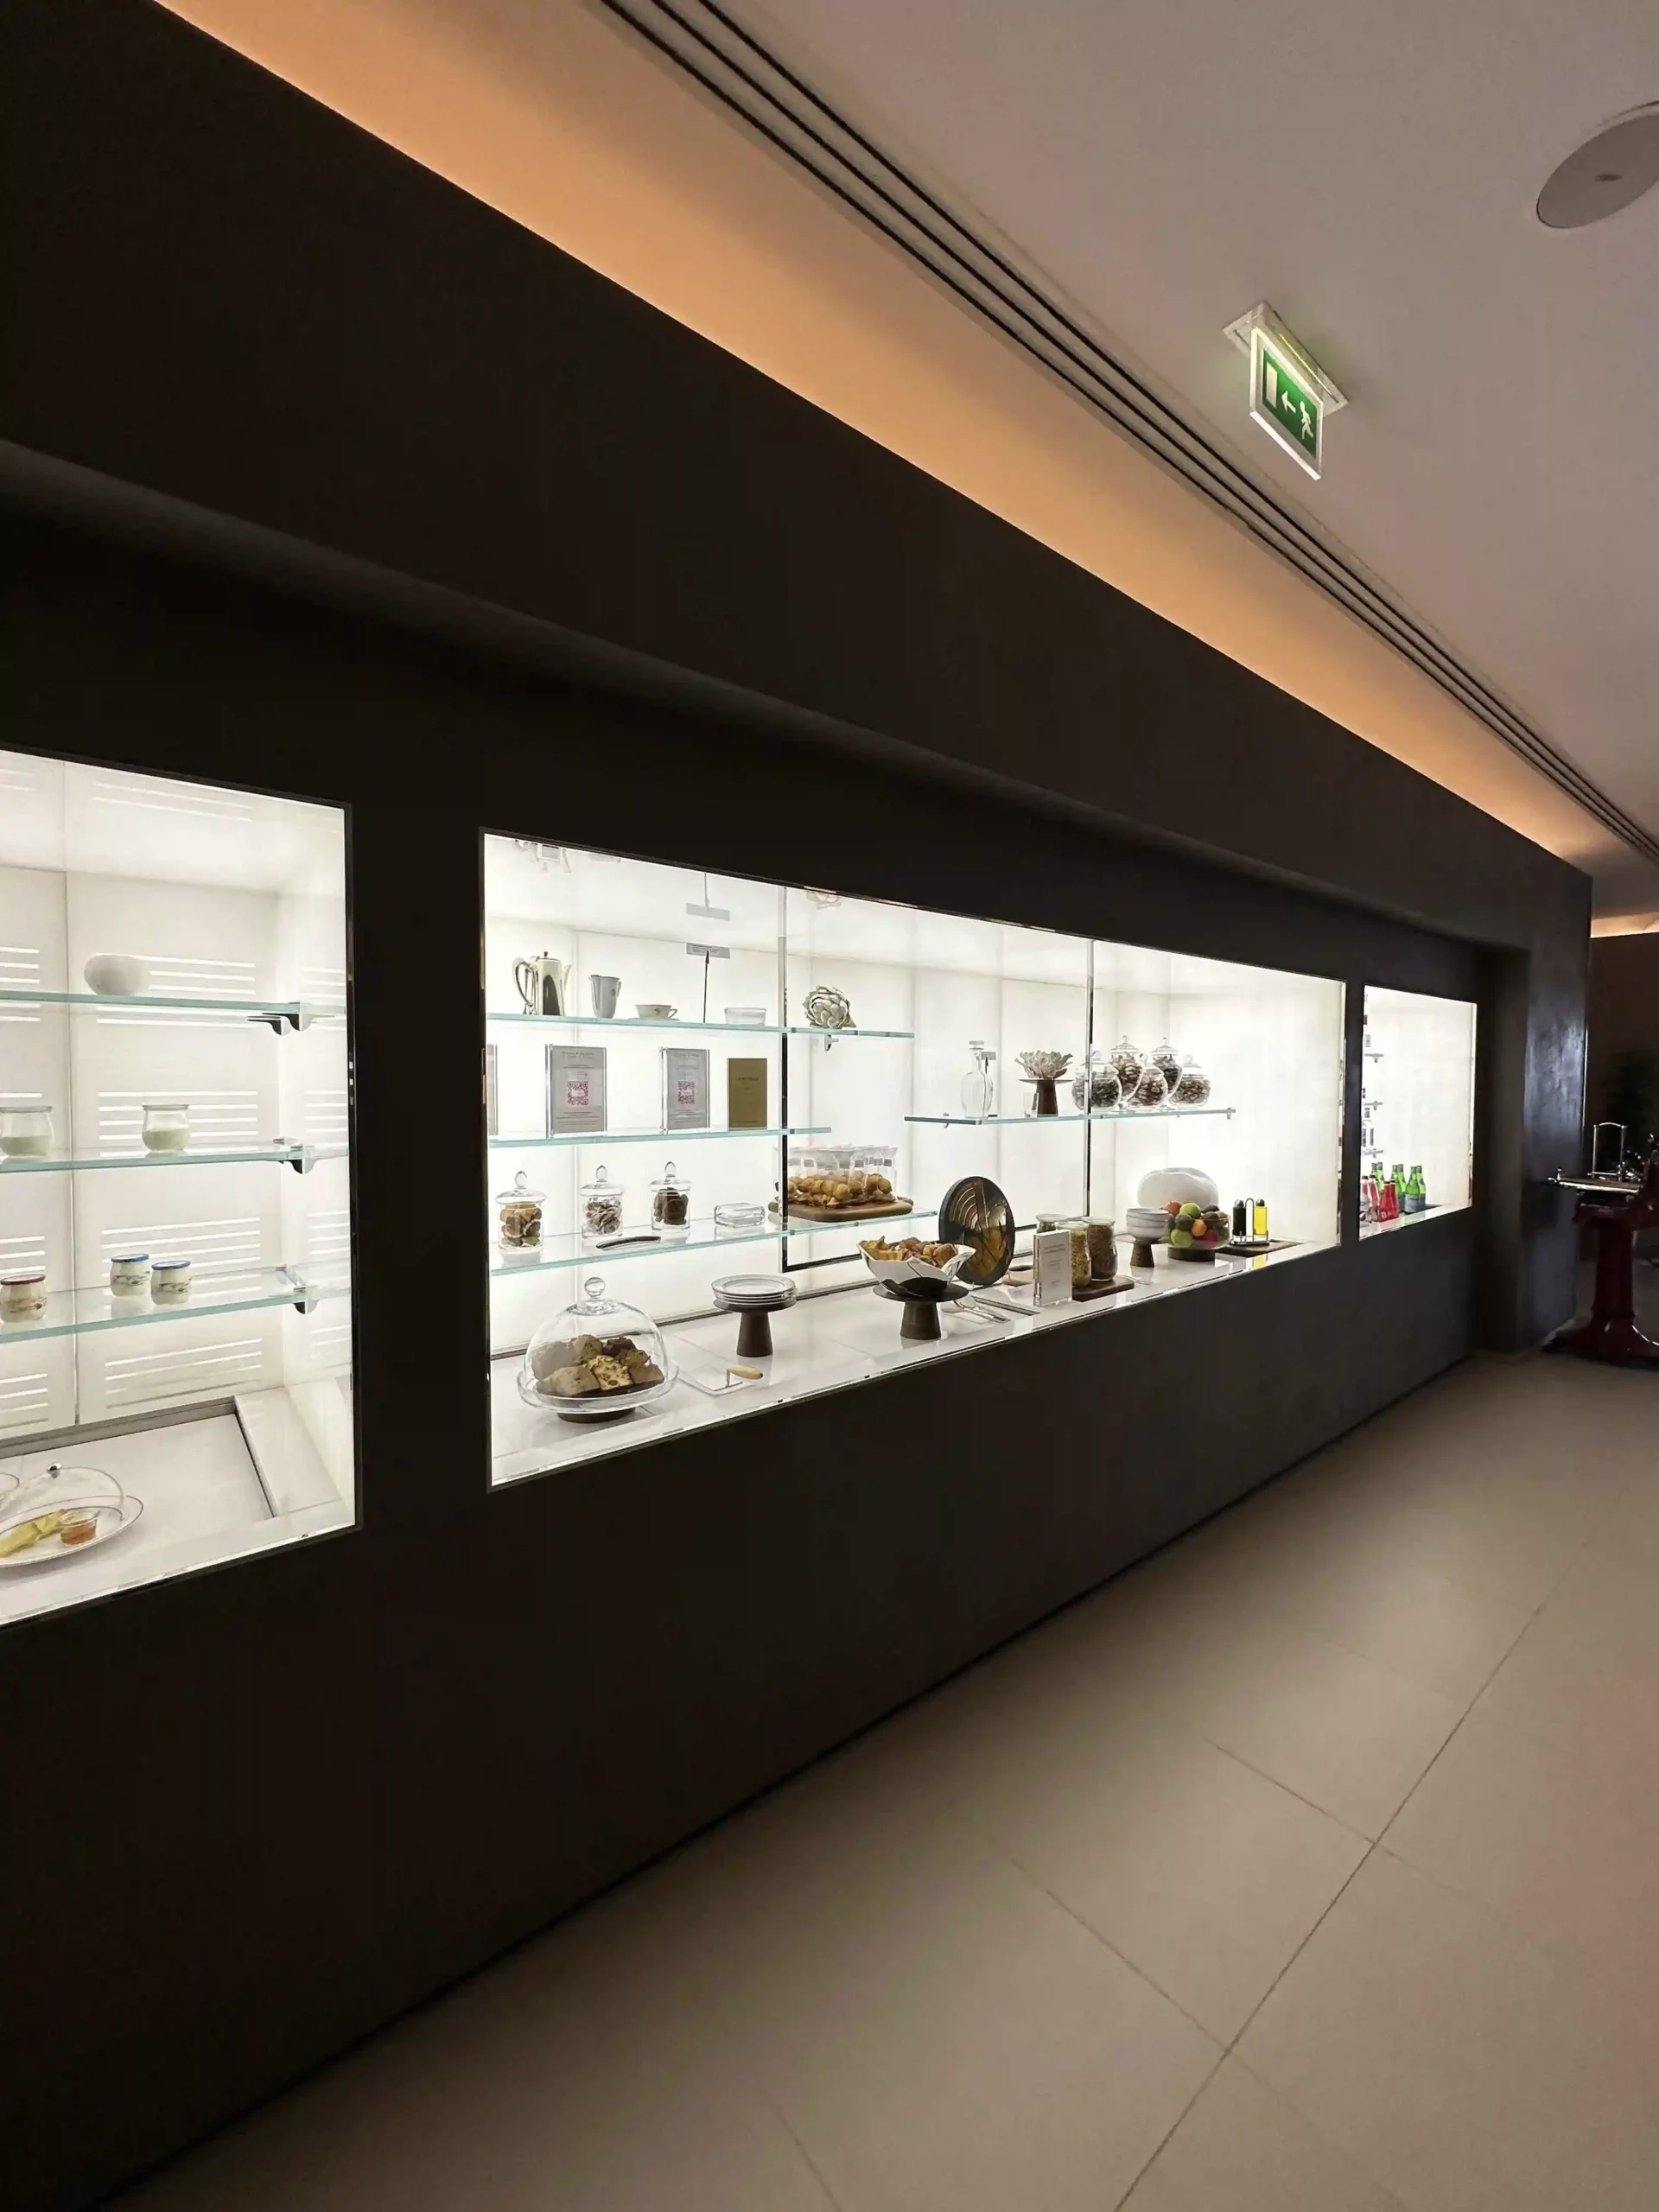 a display case with glass shelves and plates on it